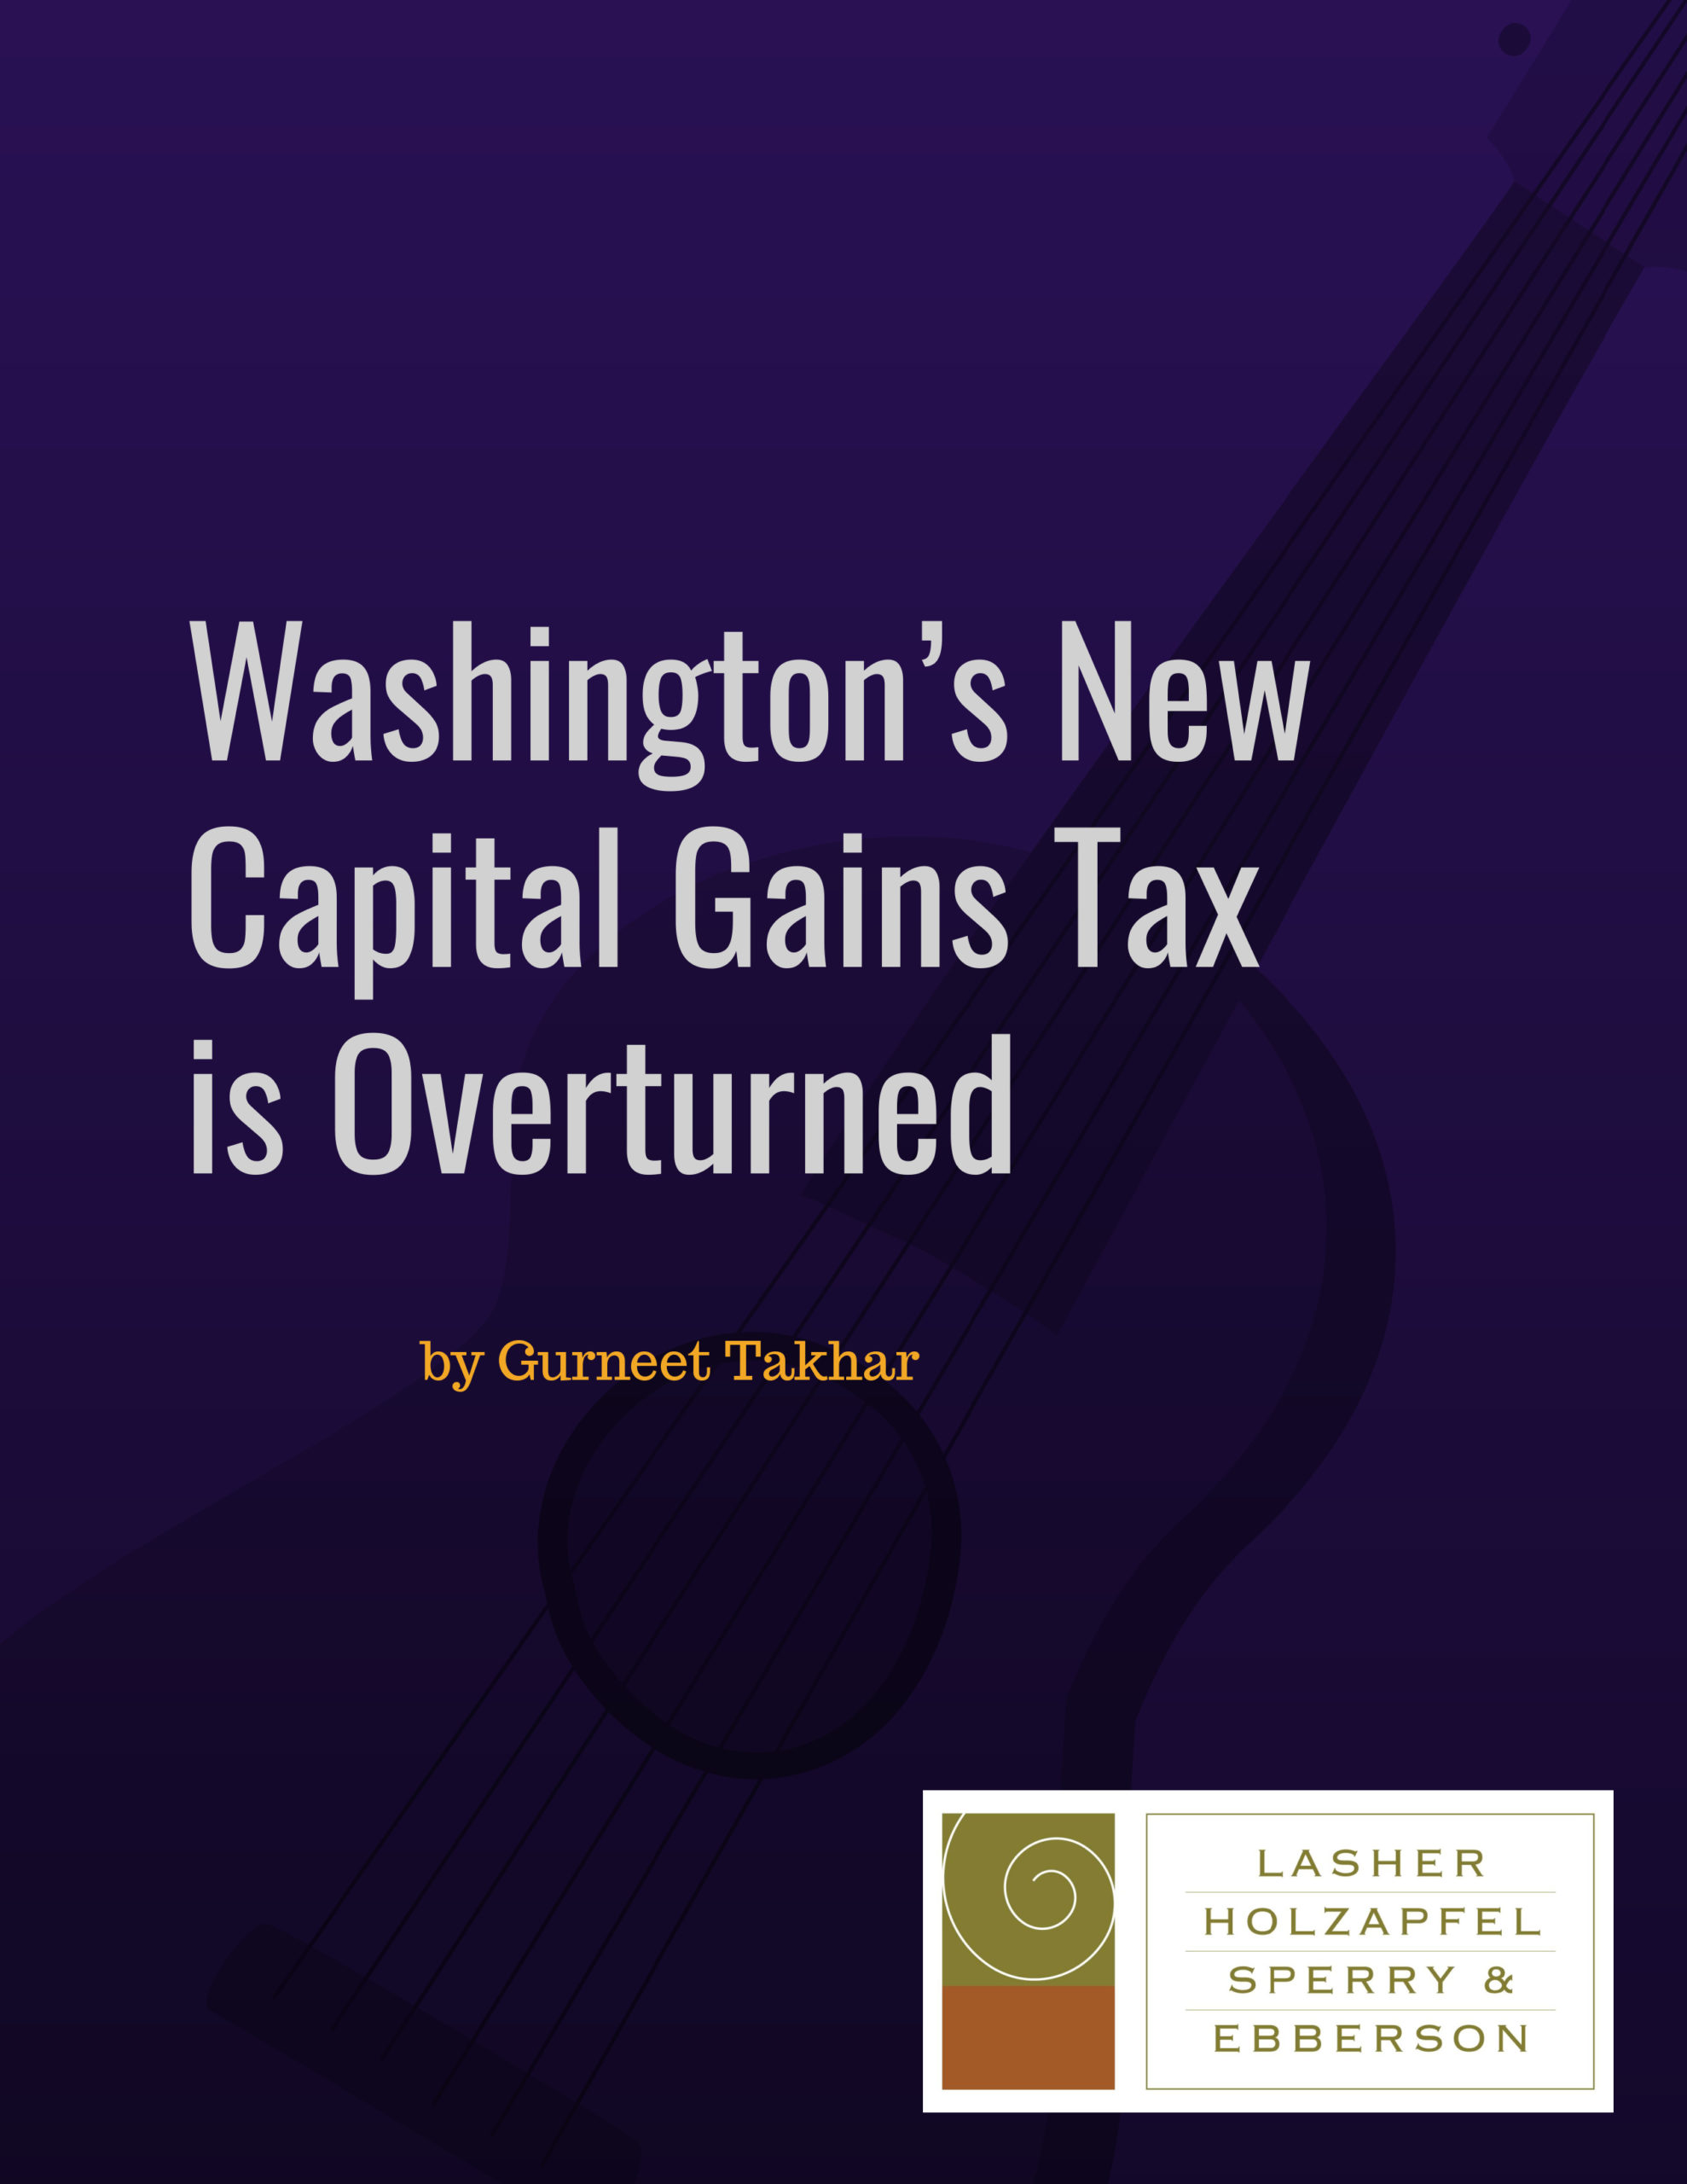 Washington’s New Capital Gains Tax is Overturned as Unconstitutional